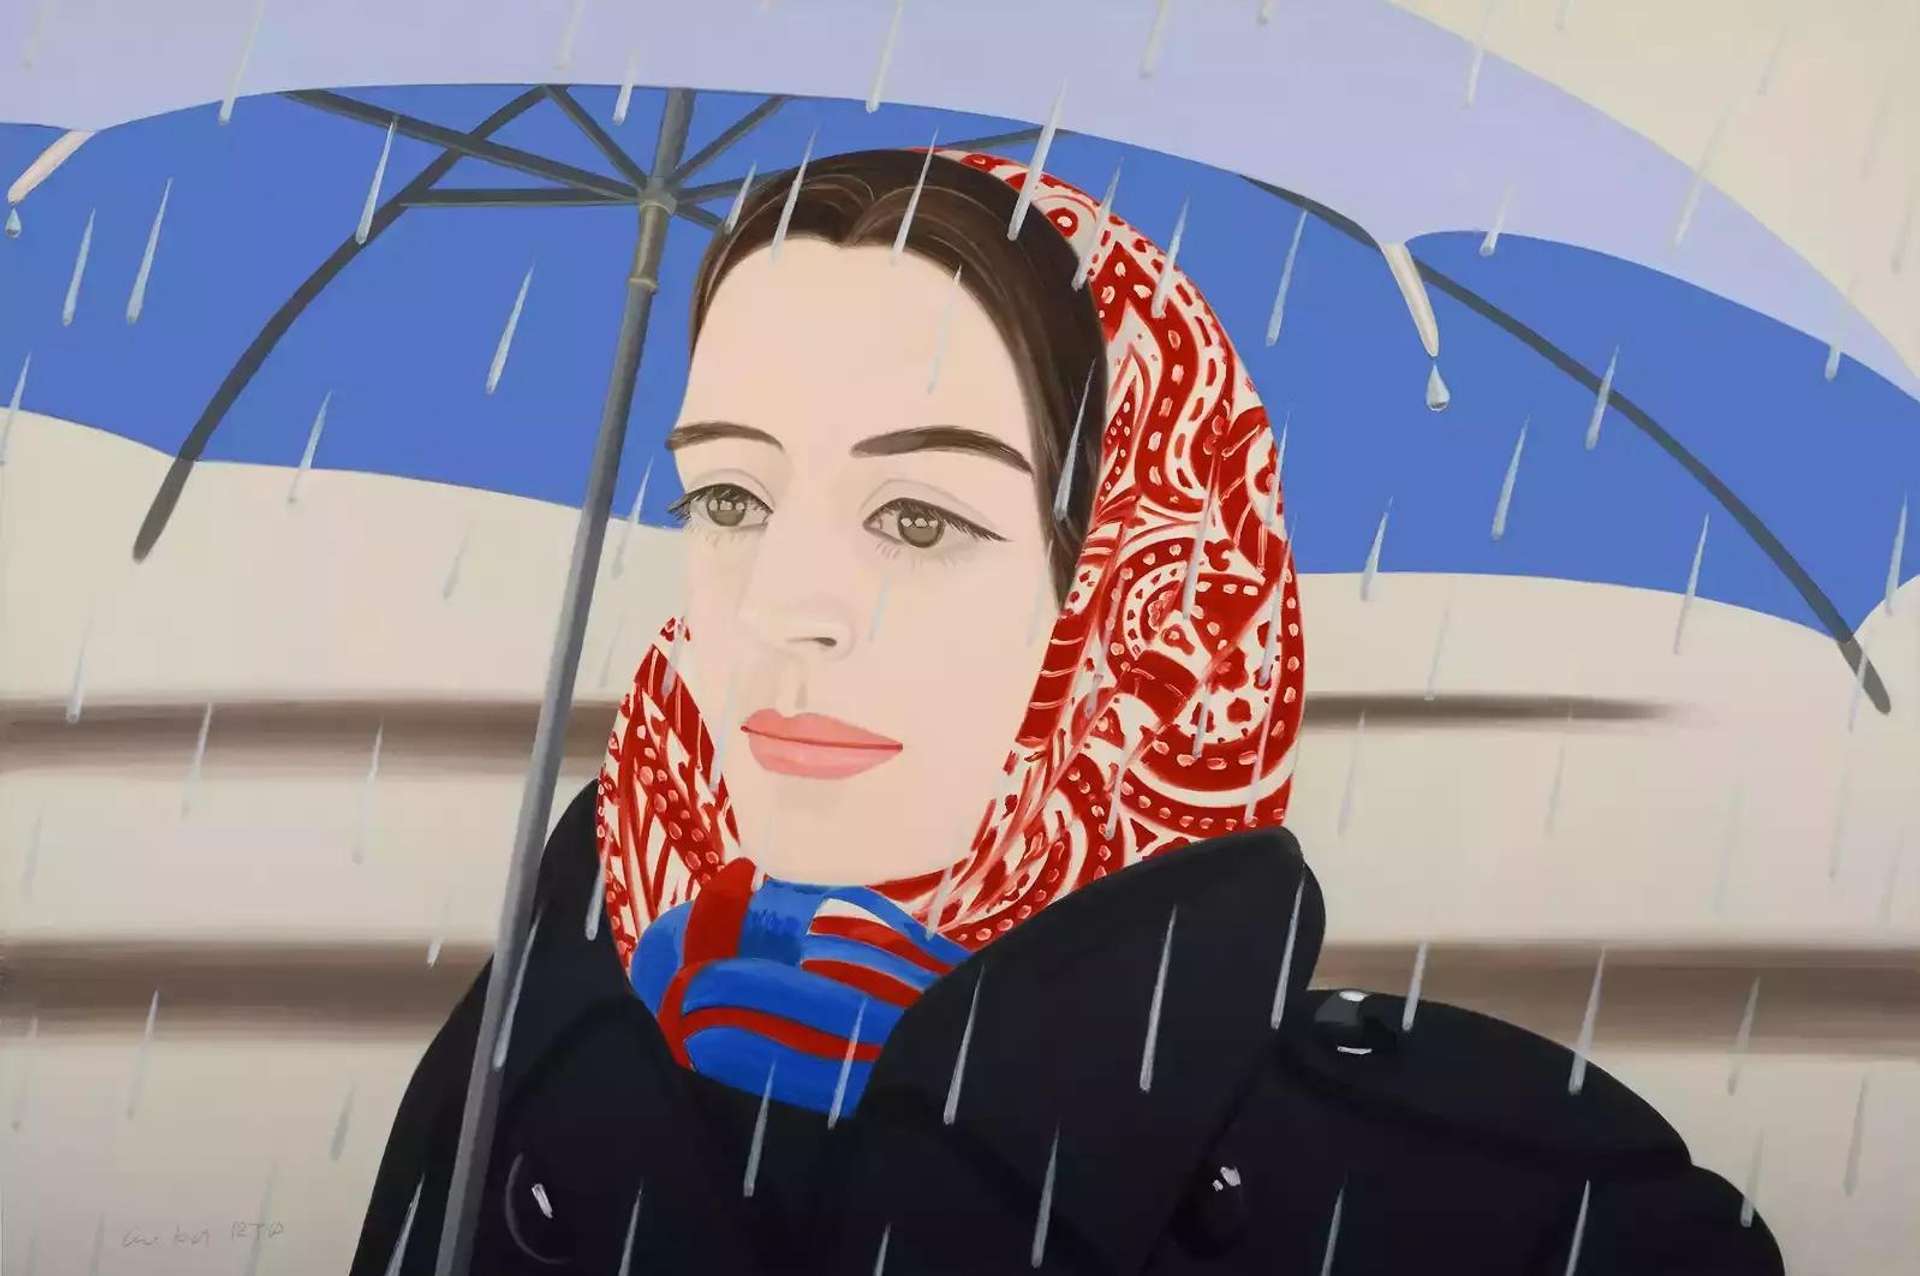 A digital print by Alex Katz depicting a woman wearing a red patterned scarf around her head with a blue umbrella, with striations of rain falling across the picture plane.